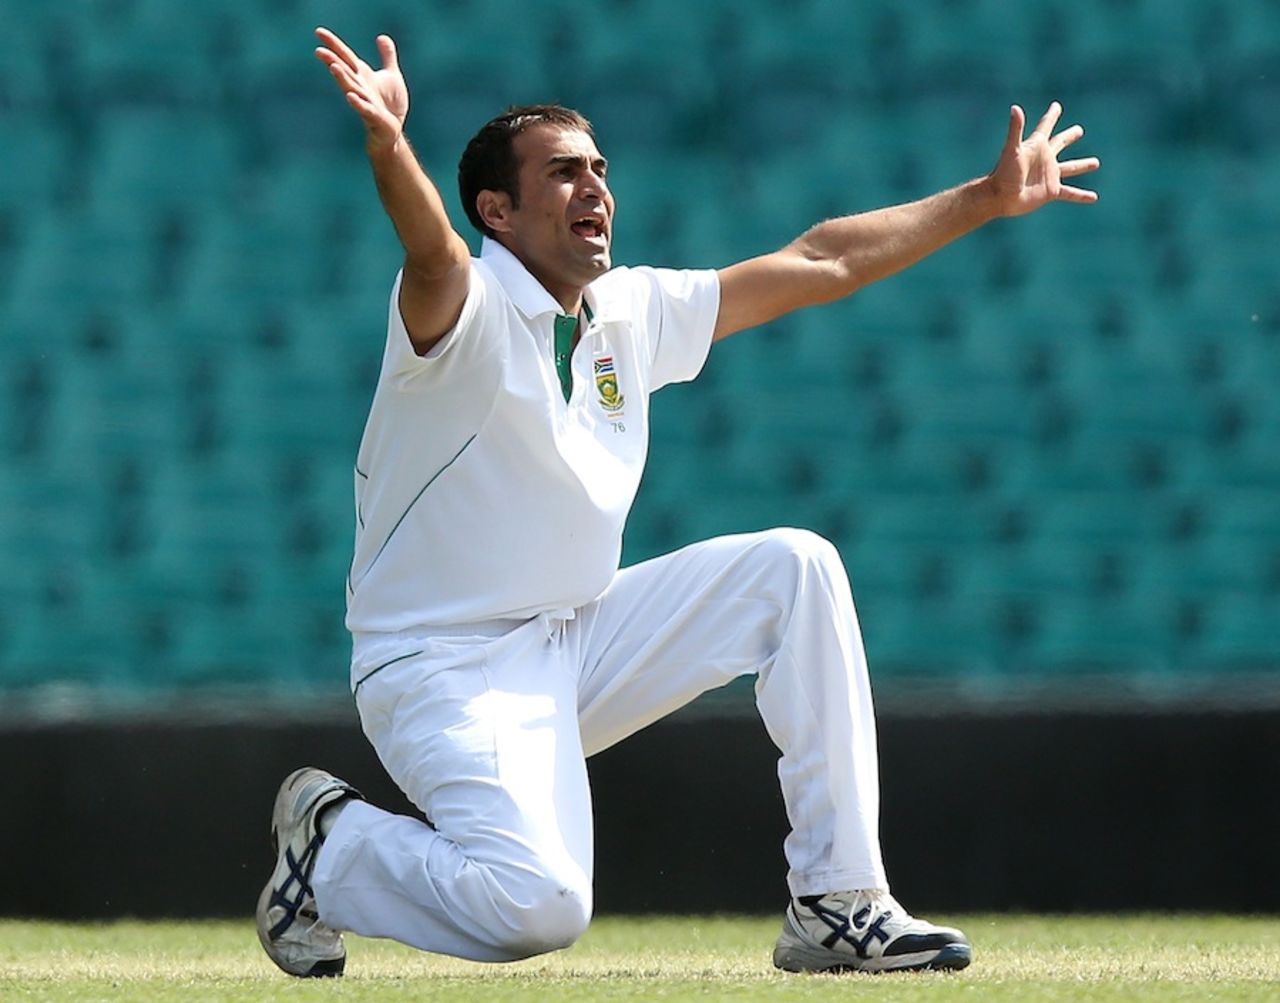 Imran Tahir appeals for a wicket, Australia A v South Africans, Sydney, 1st day, November 2, 2012